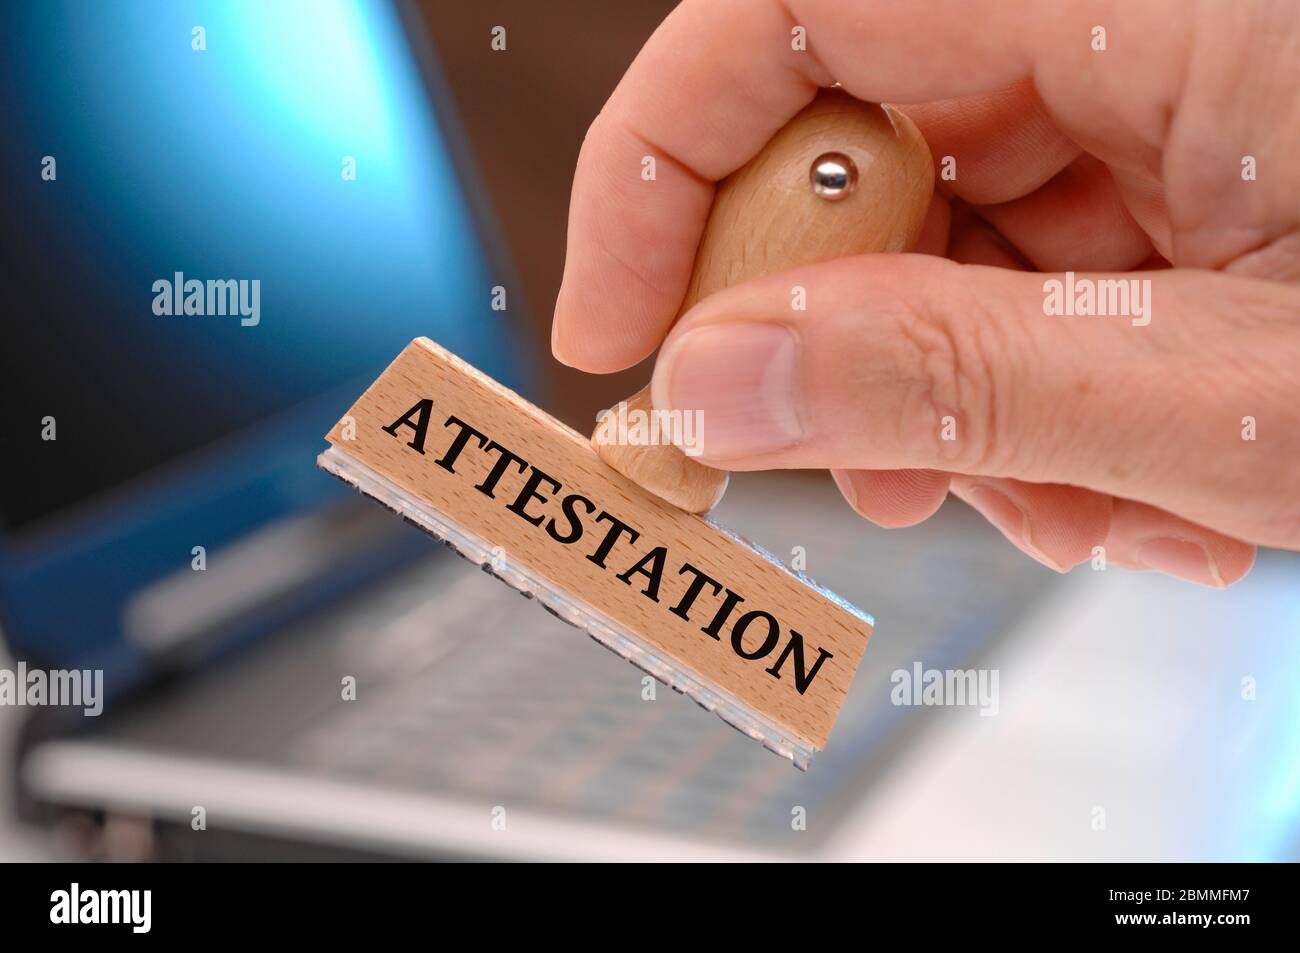 attestation  printed on rubber stamp in hand Stock Photo